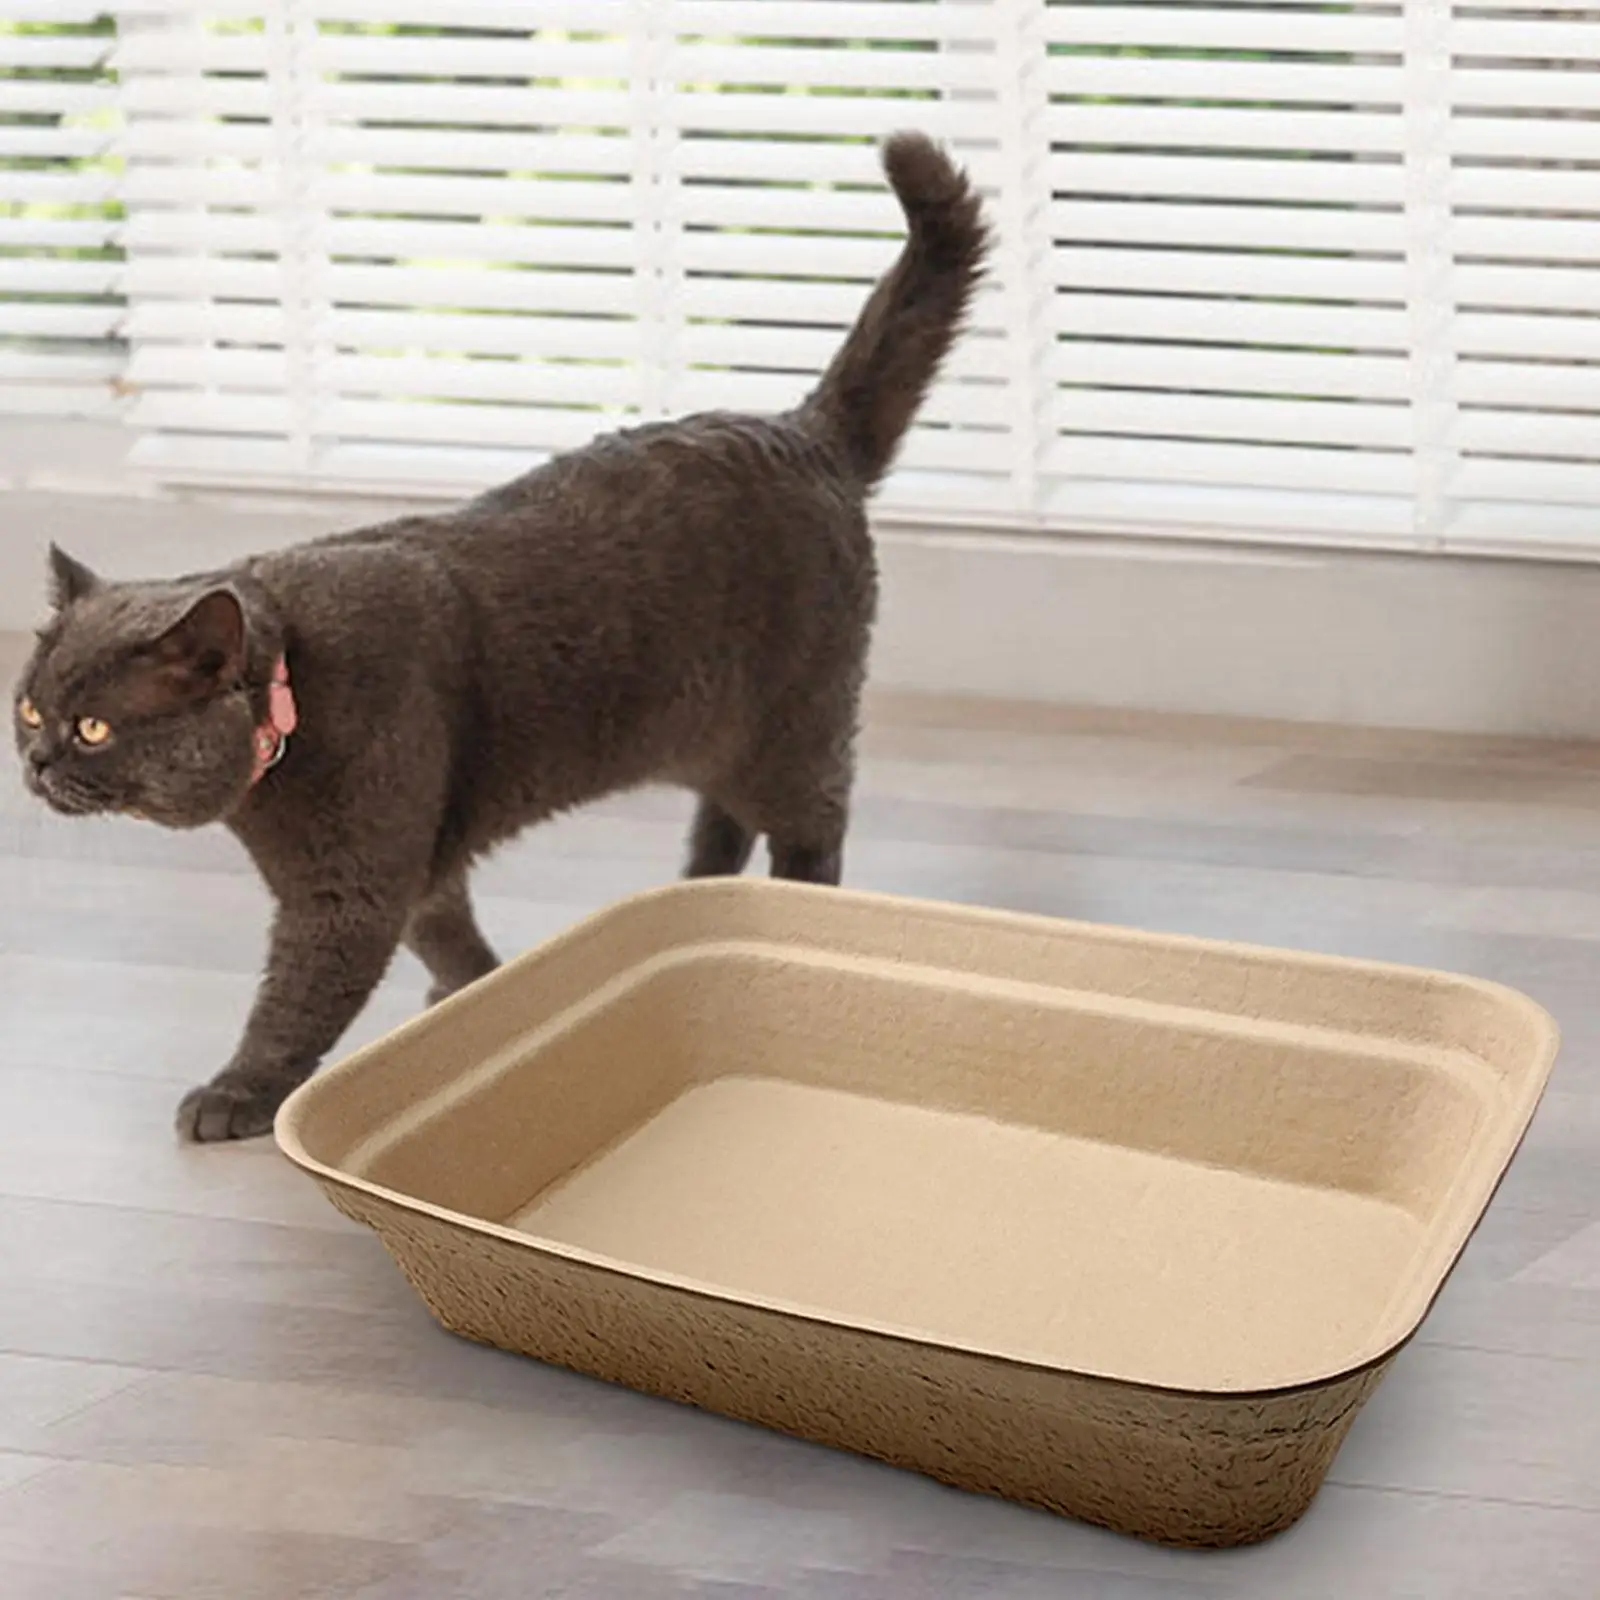 Disposable Cat Litter Boxes Pet Litter Tray for Rabbit Small Animals Bunny